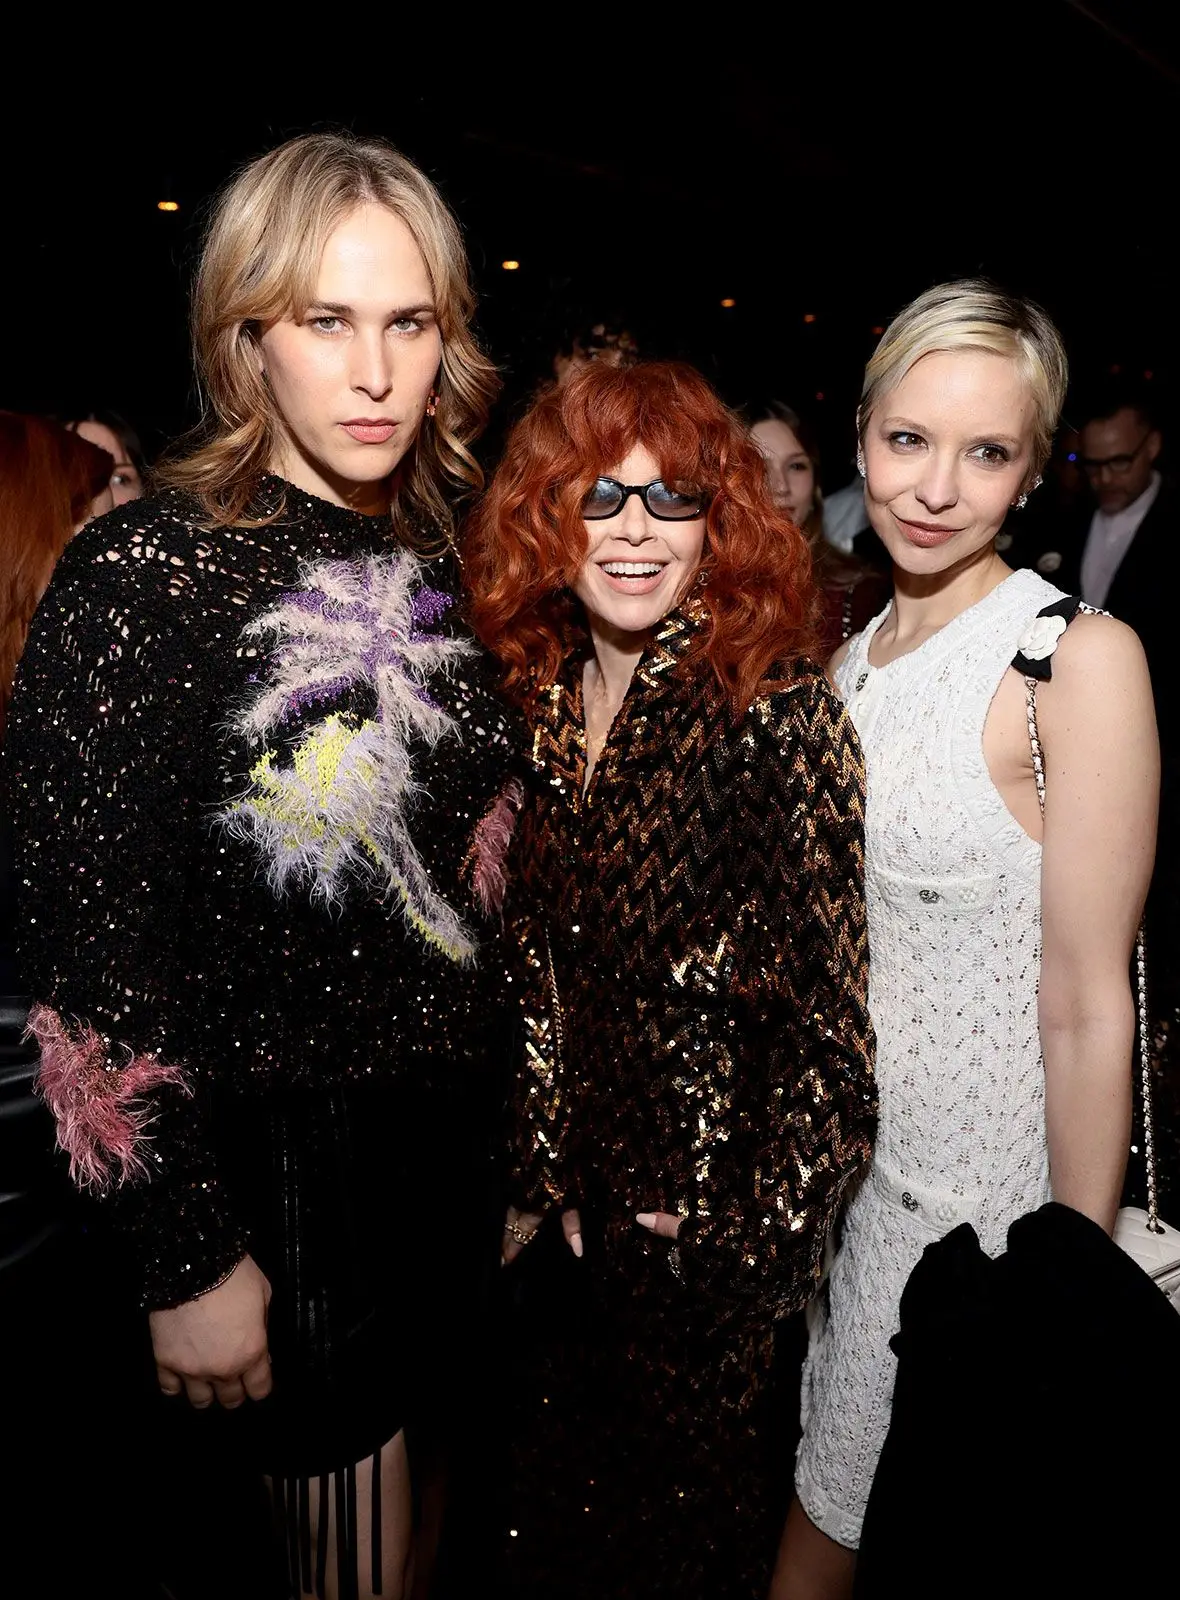 Tommy Dorfman, Natasha Lyonne and Annabelle Dexter-Jones at a private dinner hosted by Chanel.